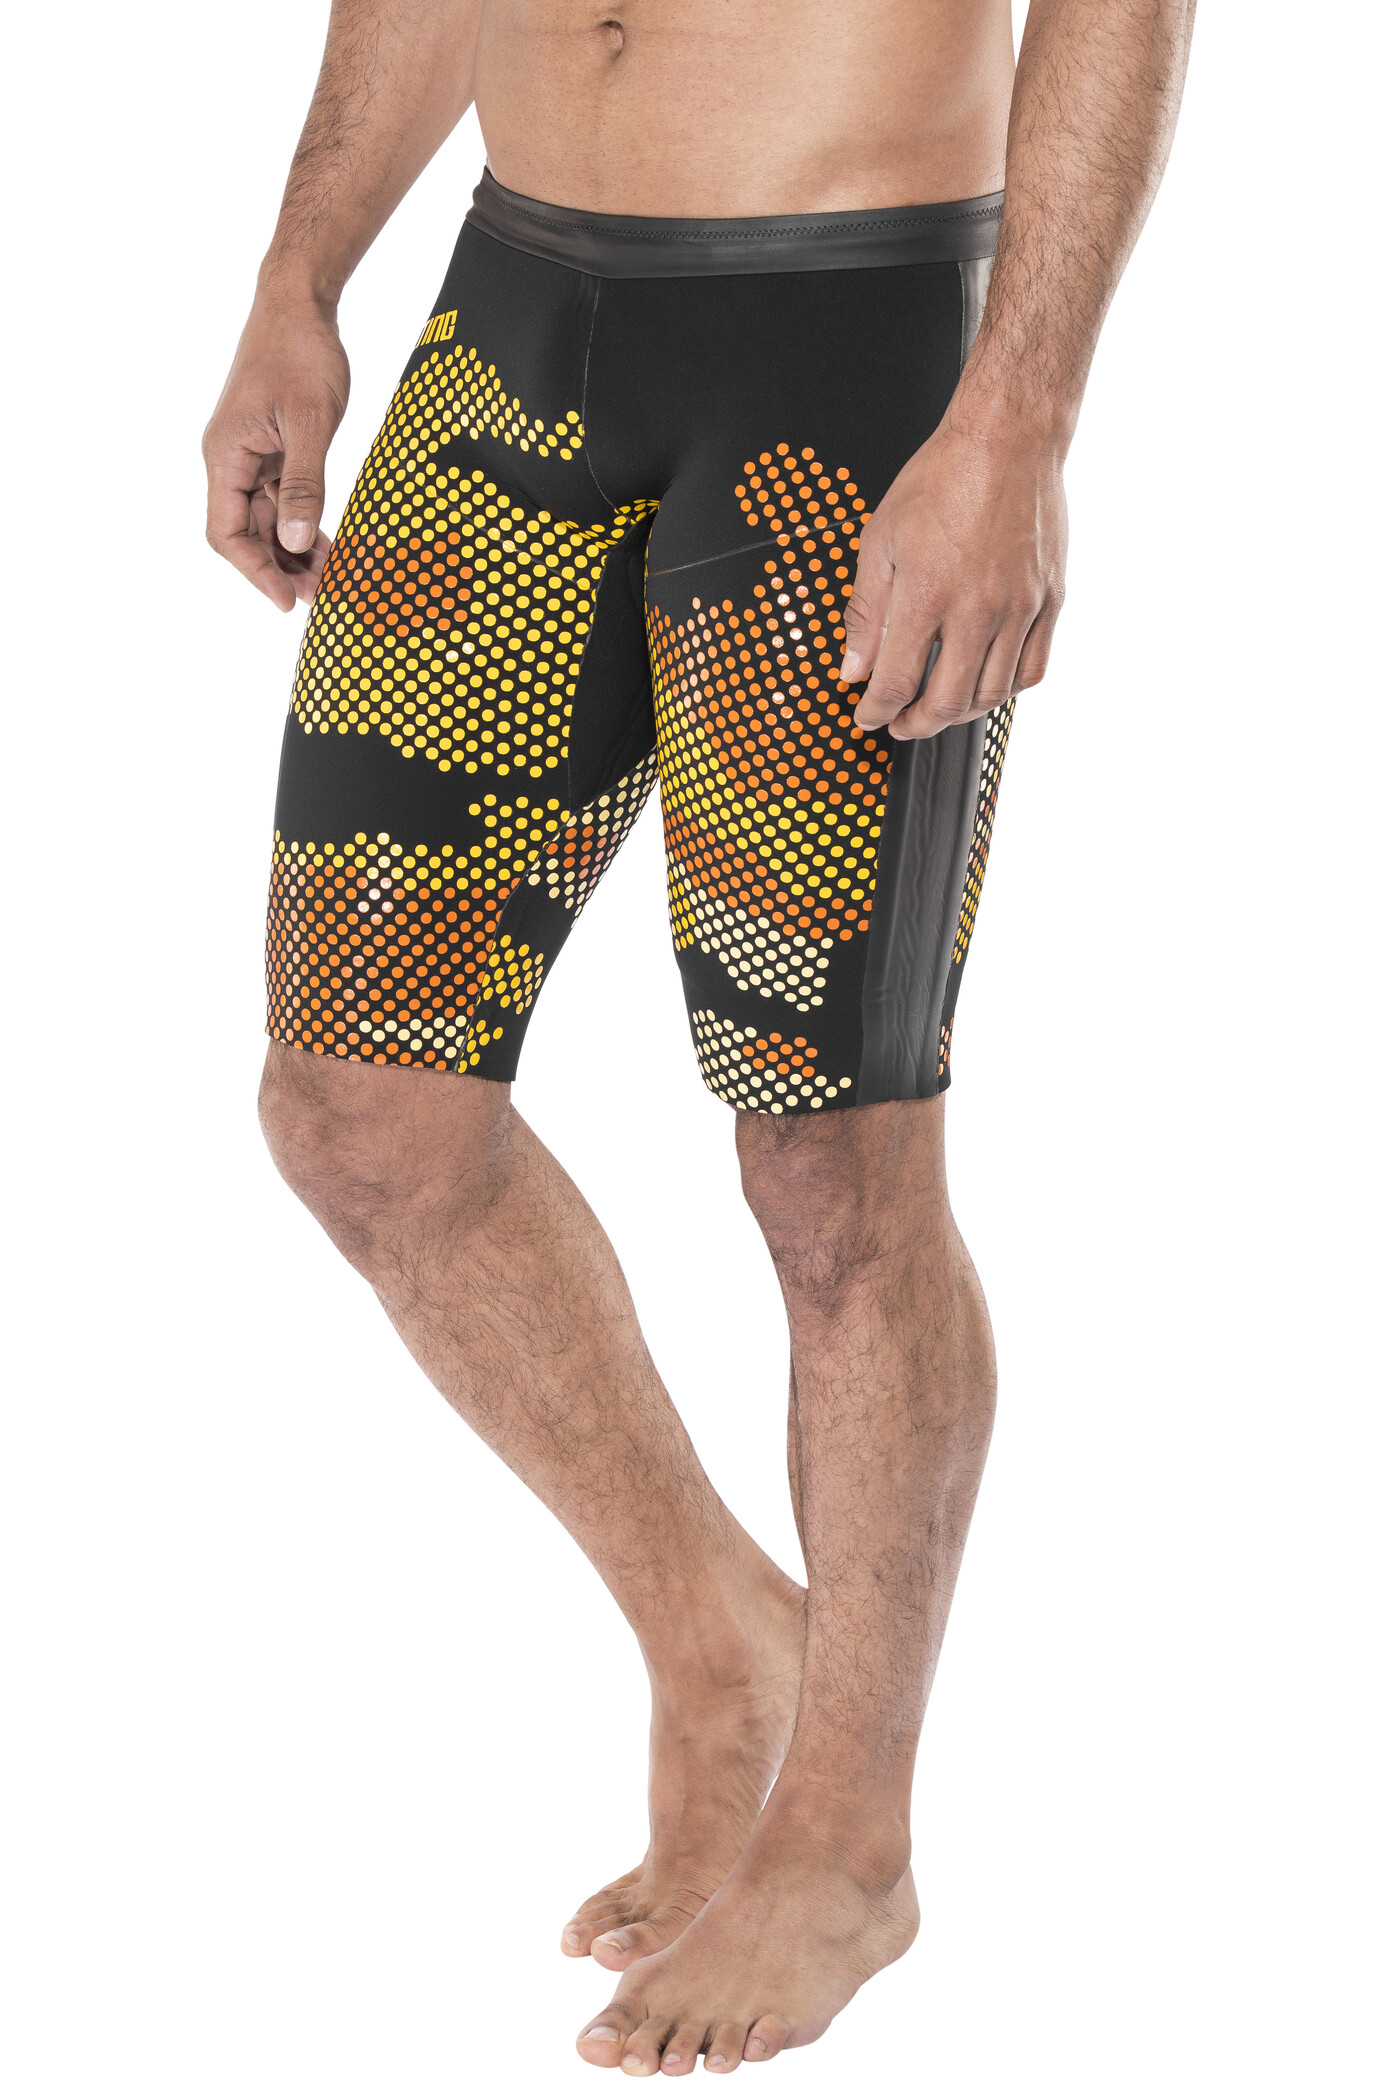 Helicopters Red Mens Swim Trunks Board Beachwear Casual Beach Shorts for Men with Mesh Lining